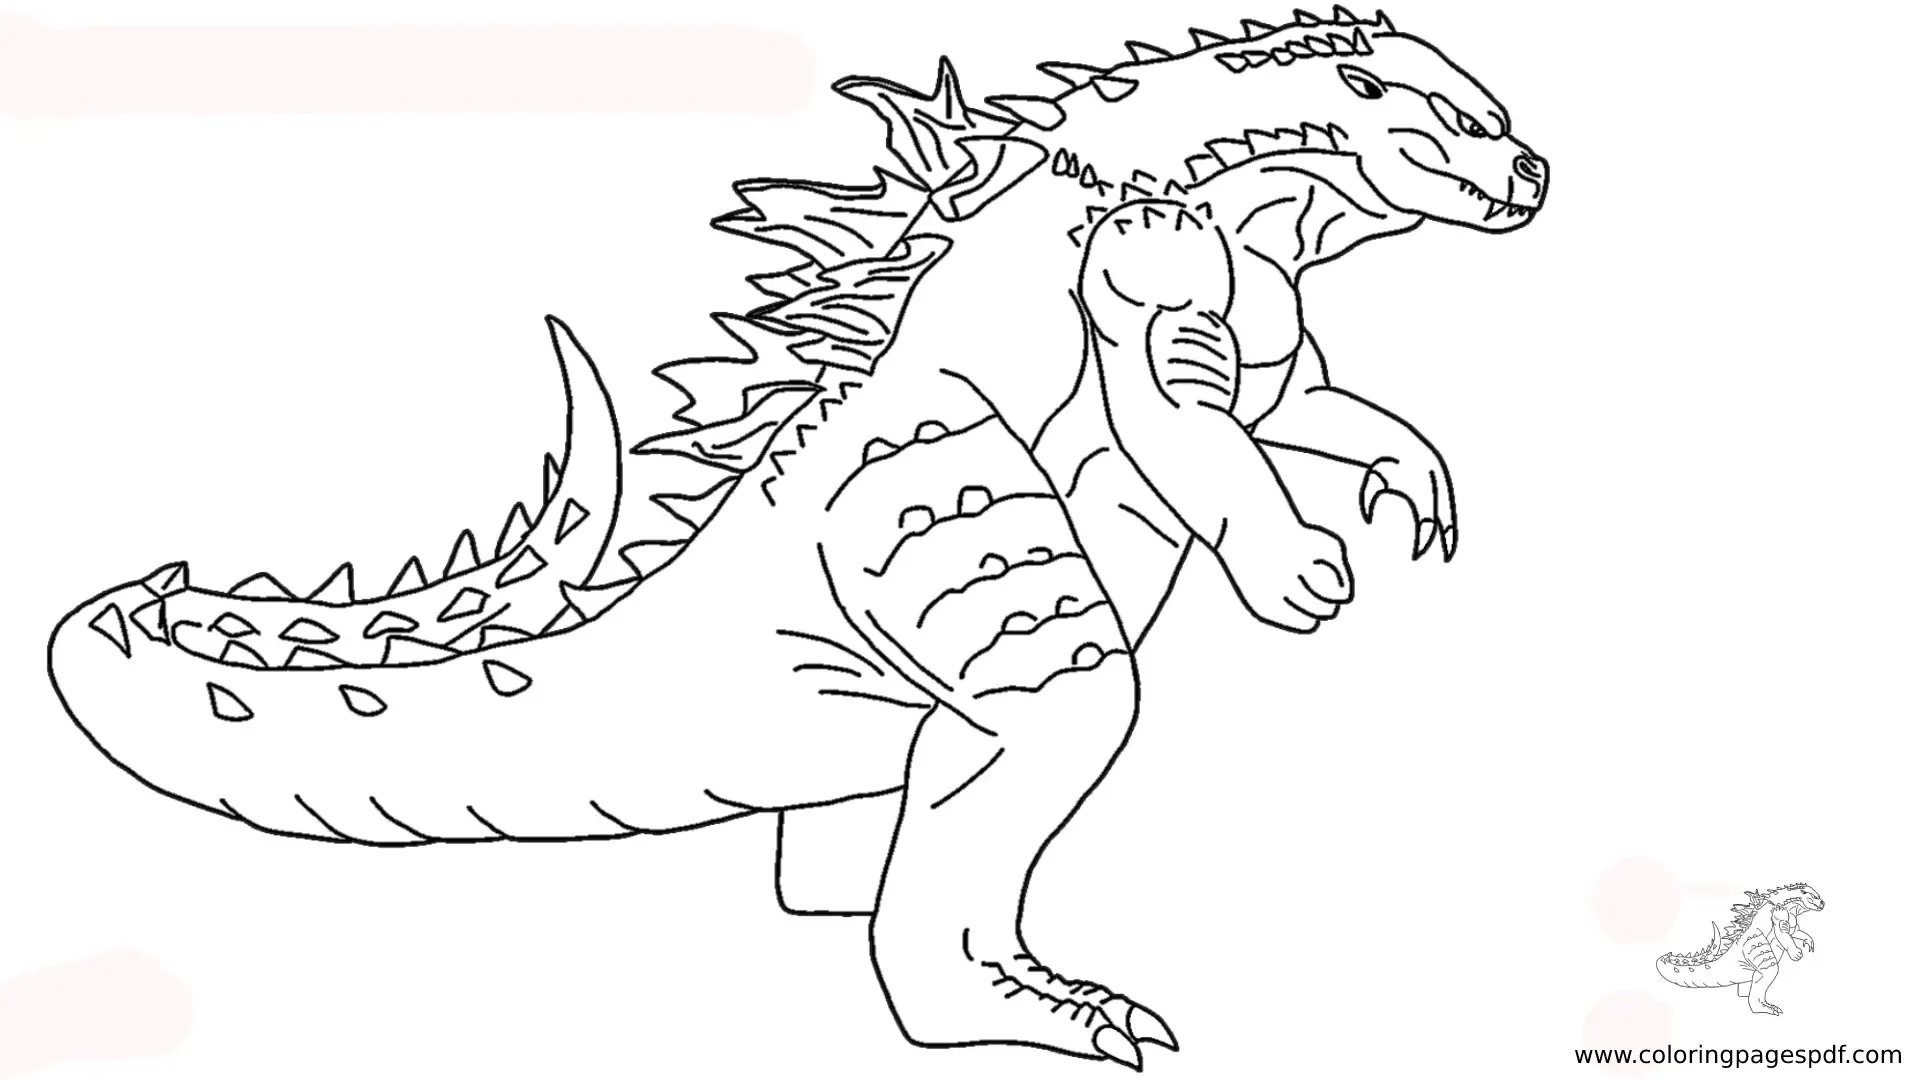 Coloring Pages Of Godzilla Side View